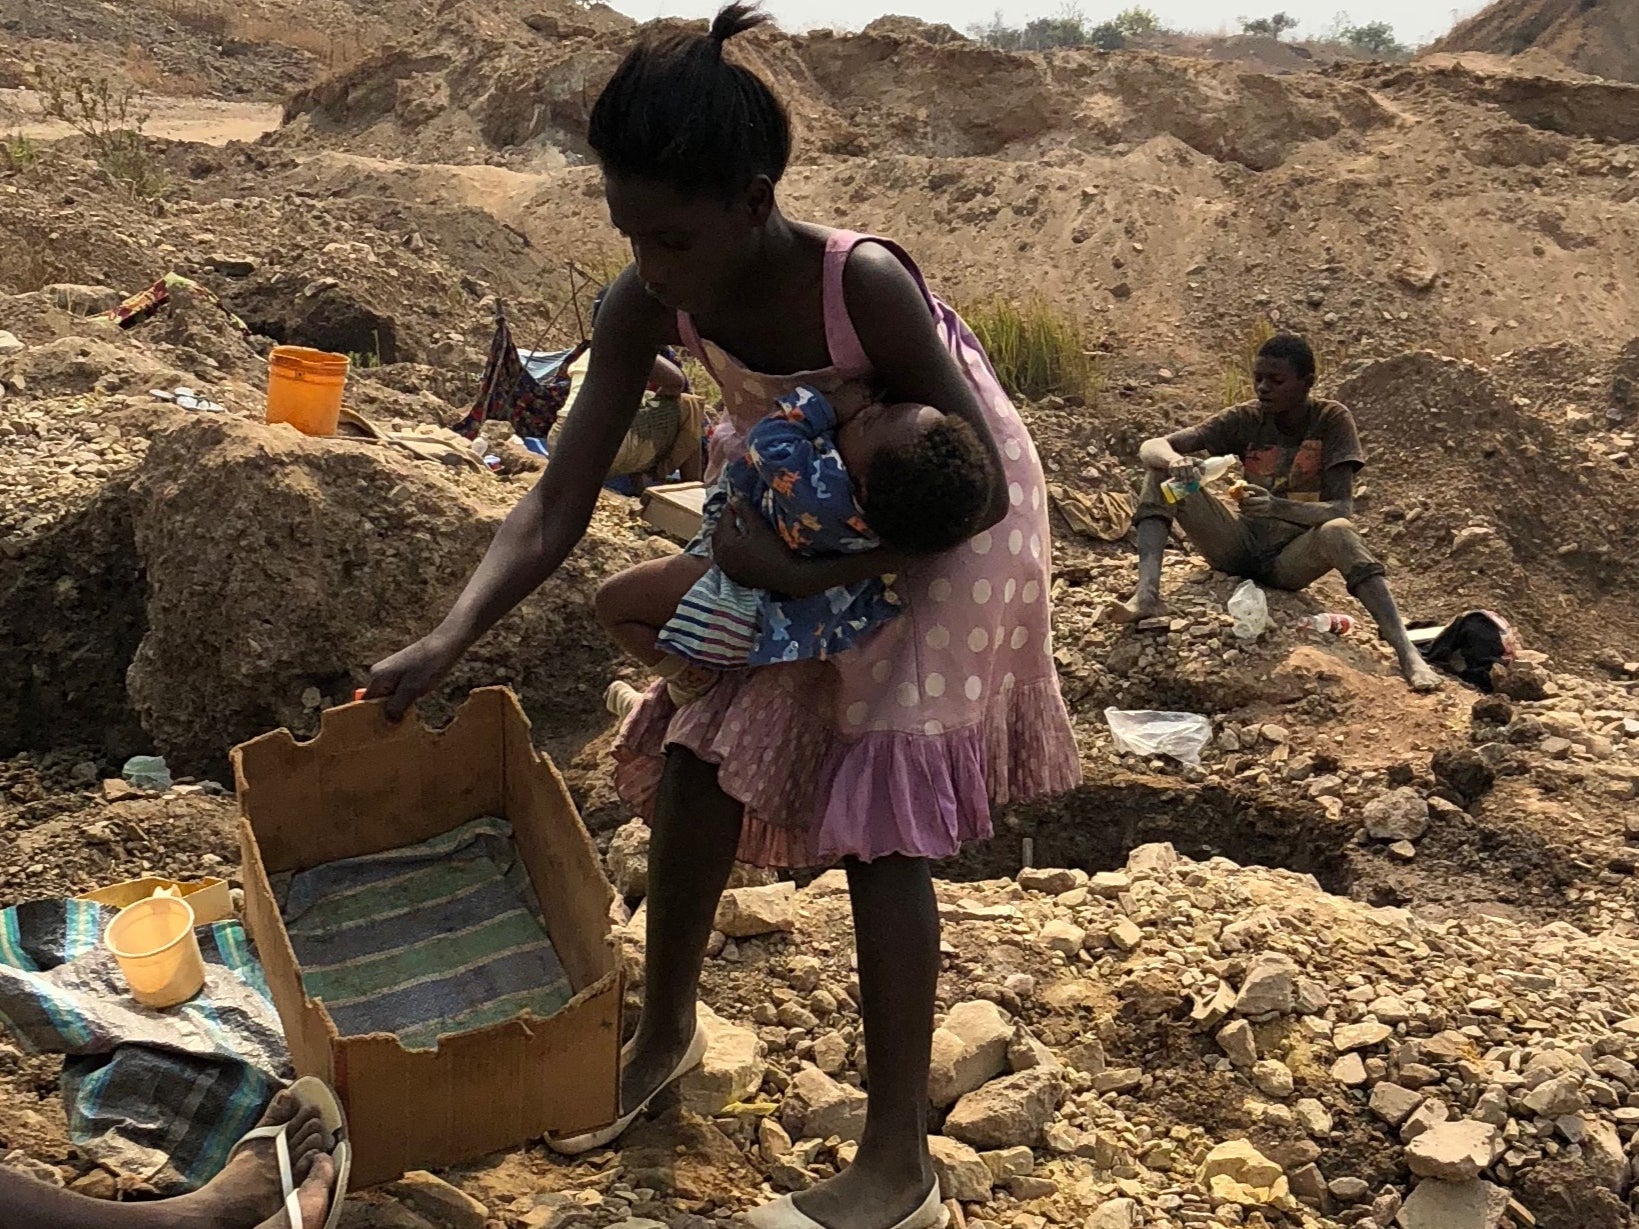 <p>A woman places a baby into a cardboard crib on the ground while she works at a cobalt mine site. Women are paid only a fraction of the paltry sums paid to men for their mining work</p>